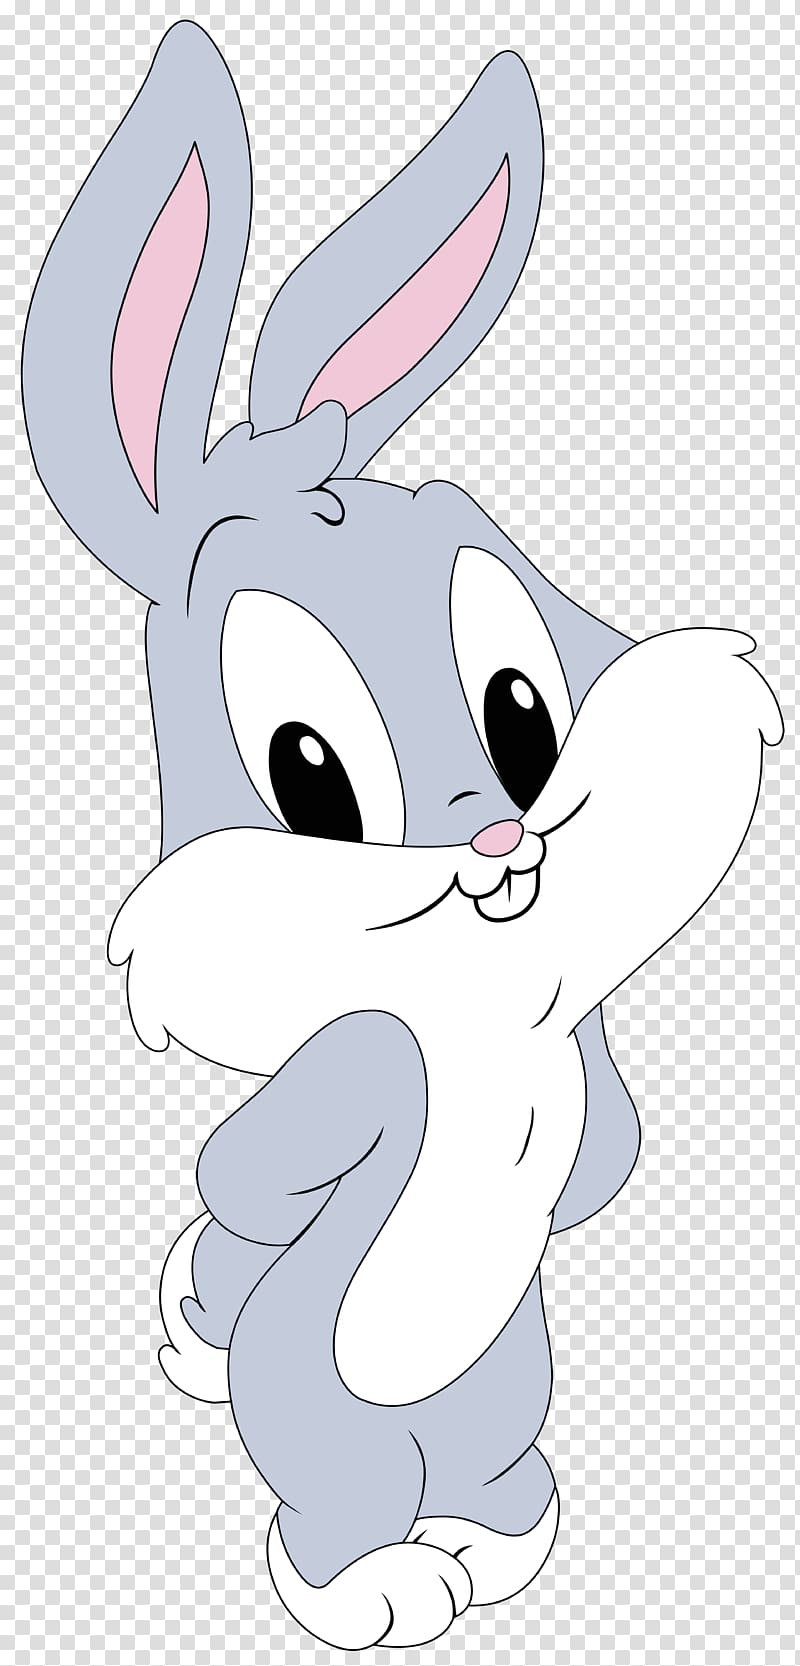 Bugs Bunny Lola Bunny Babs Bunny Porky Pig Daffy Duck, bunny transparent background PNG clipart